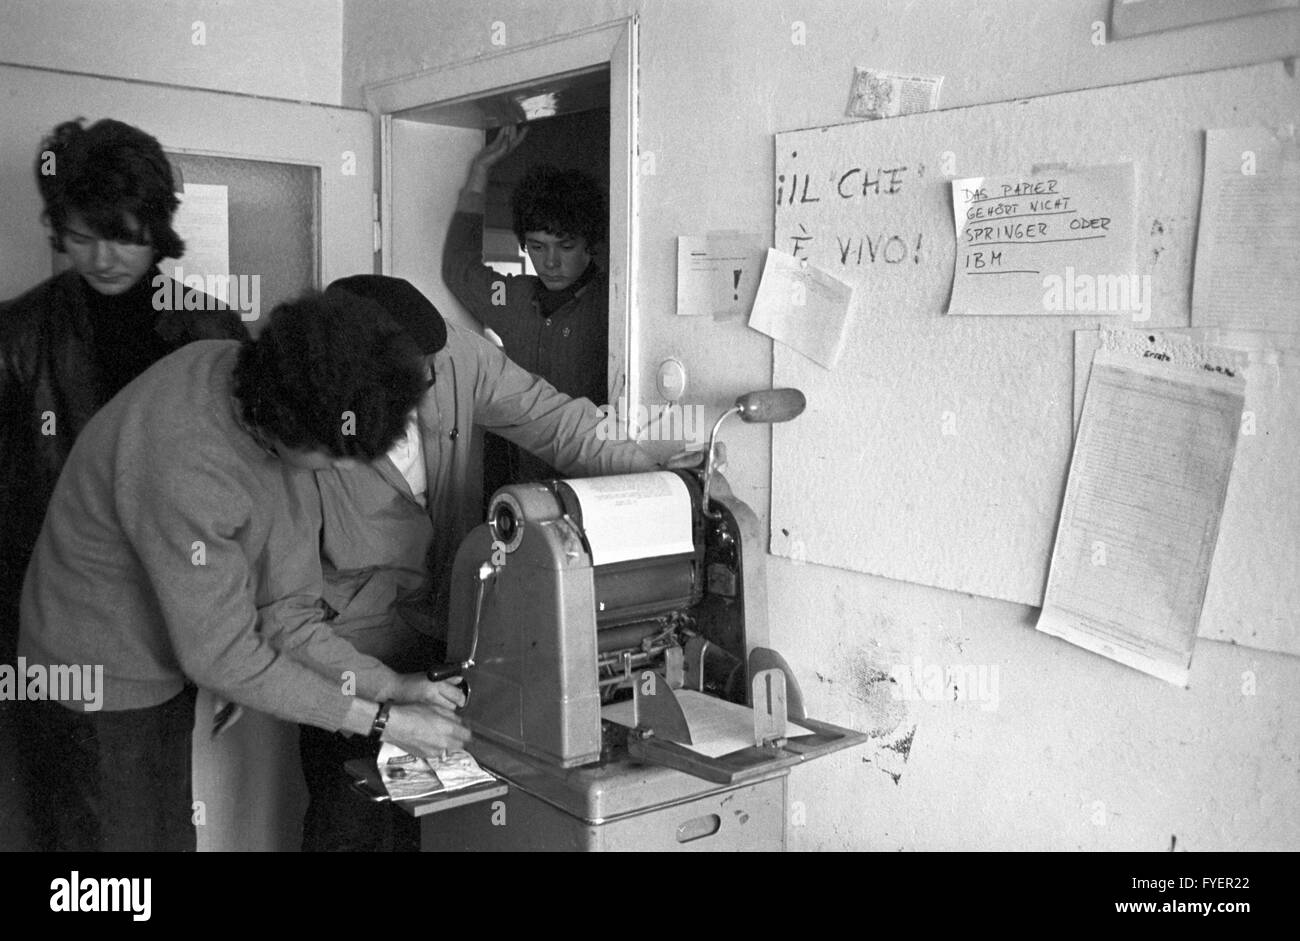 Members of the SDS prepare their flyers in Frankfurt on 13 May 1968 for the demonstrations against the emergency laws. Stock Photo